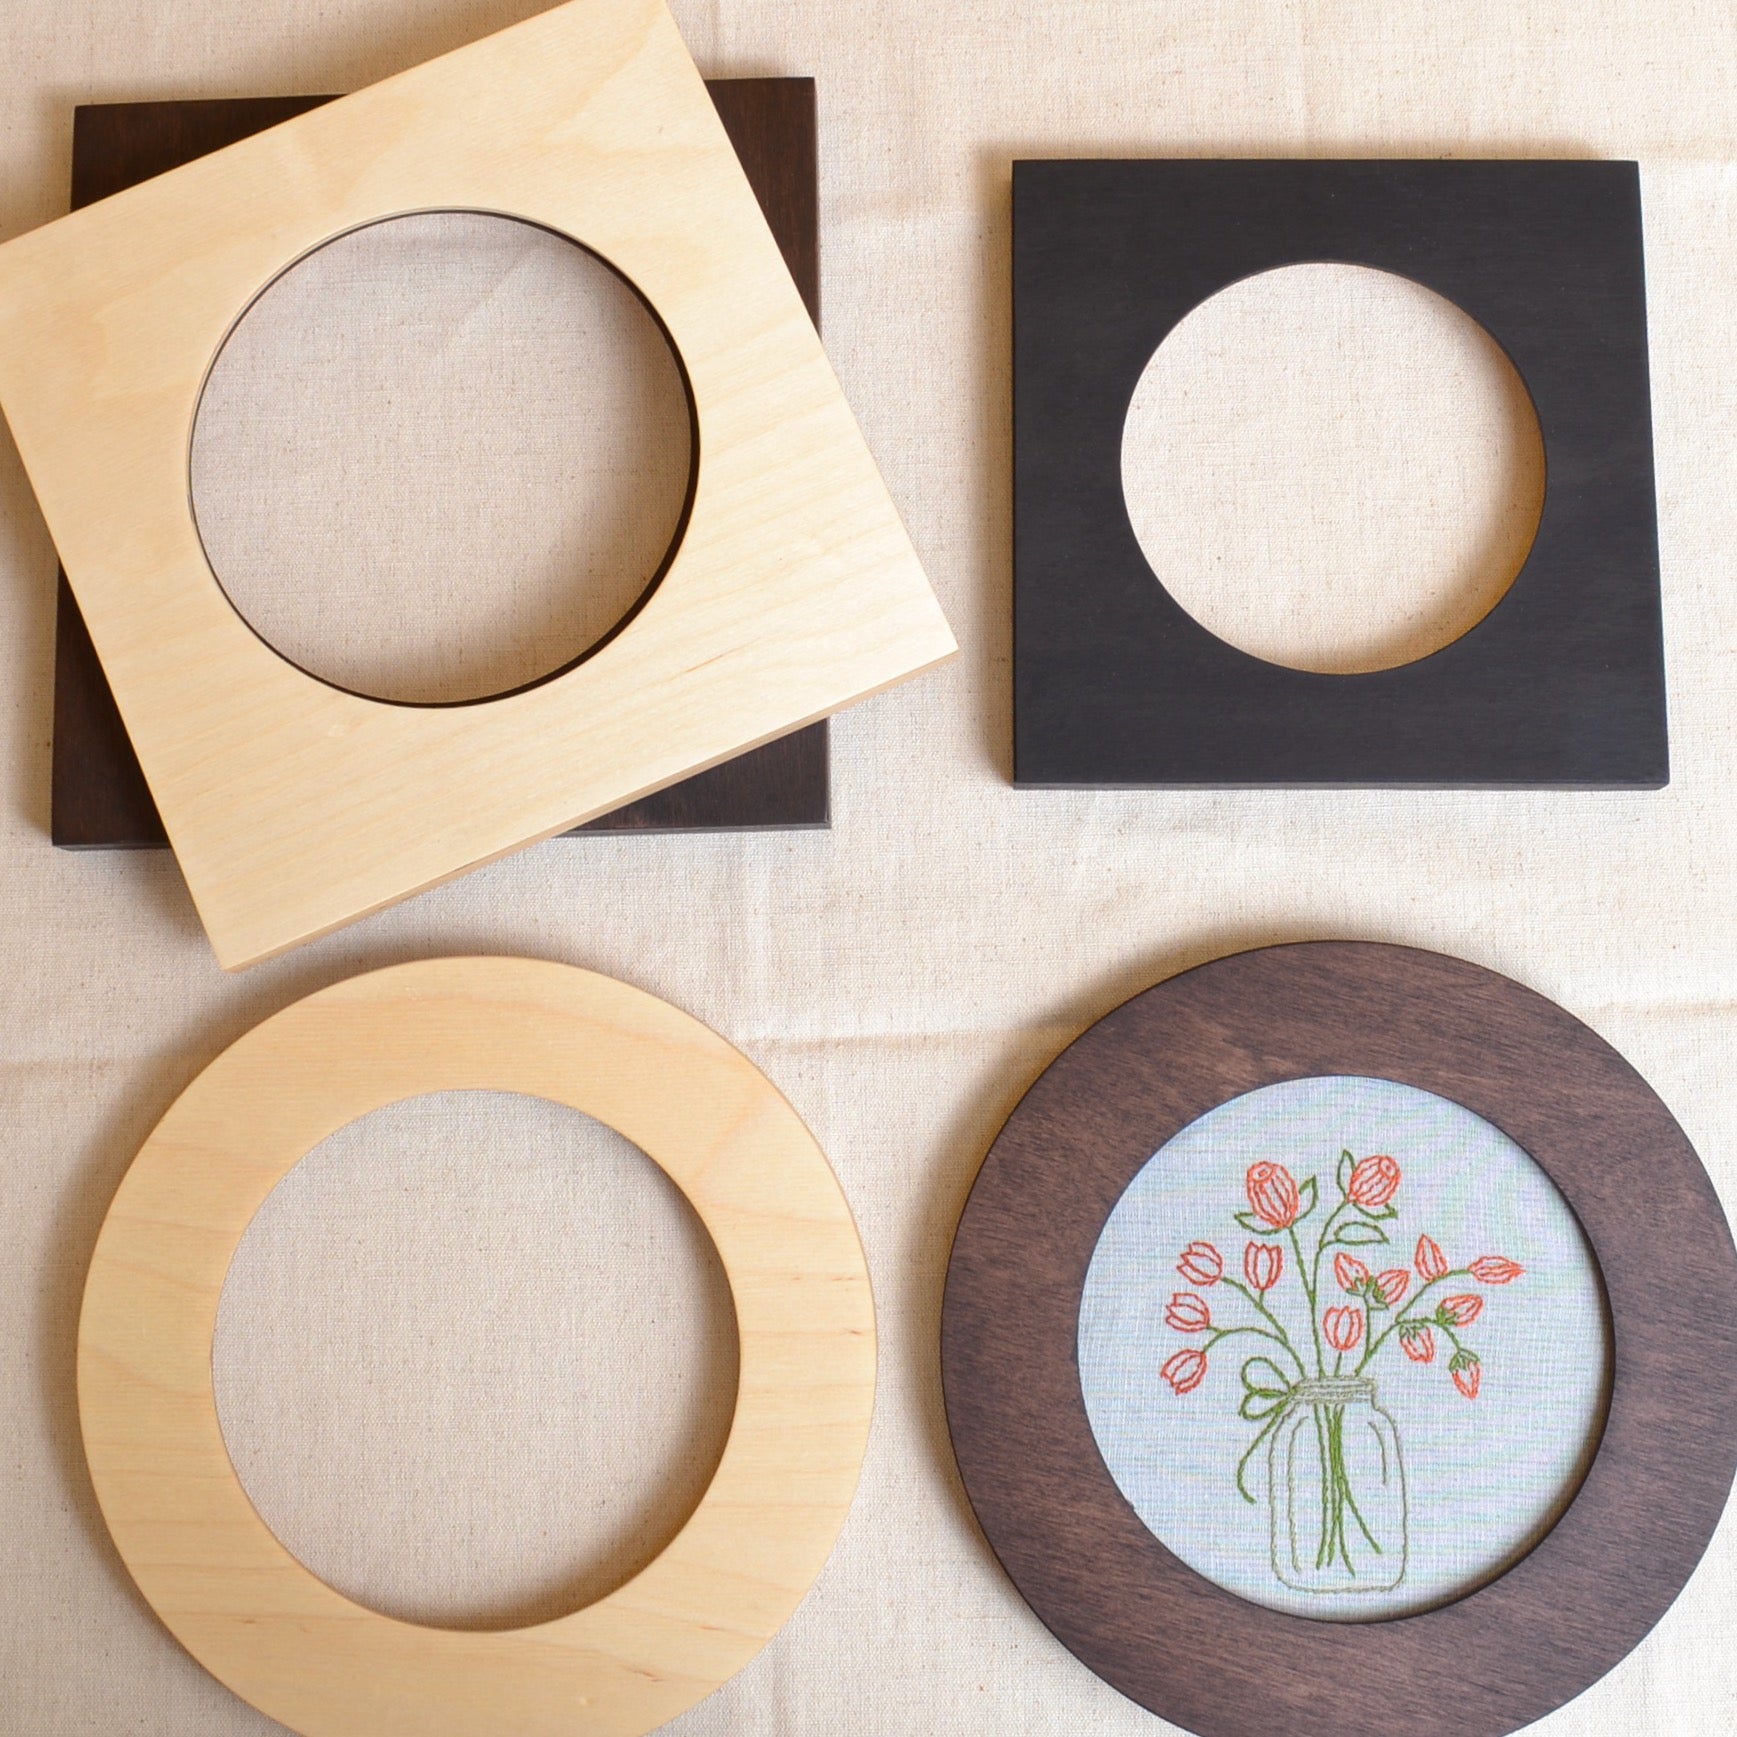  4 Pcs Wood Embroidery Hoop Frame 6 Inch Round Wooden Embroidery  Frame Wood Display Frame Circle for Finished Cross Stitch Hoop DIY Art  Craft Sewing Ornaments